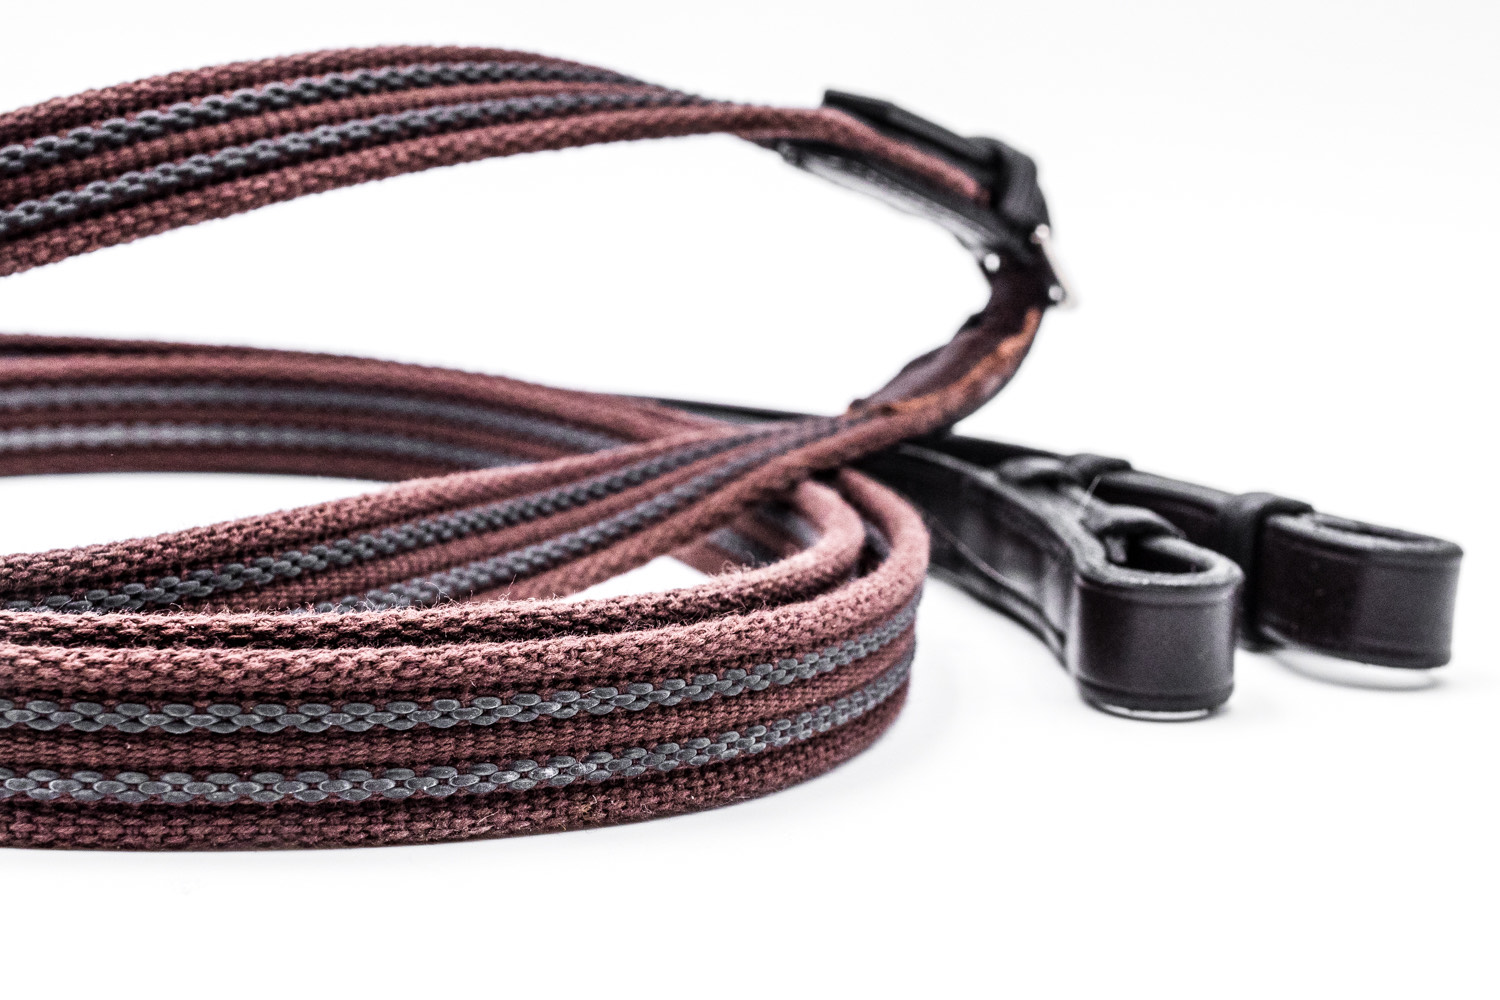 Rubberised Webbing Reins are great for grip